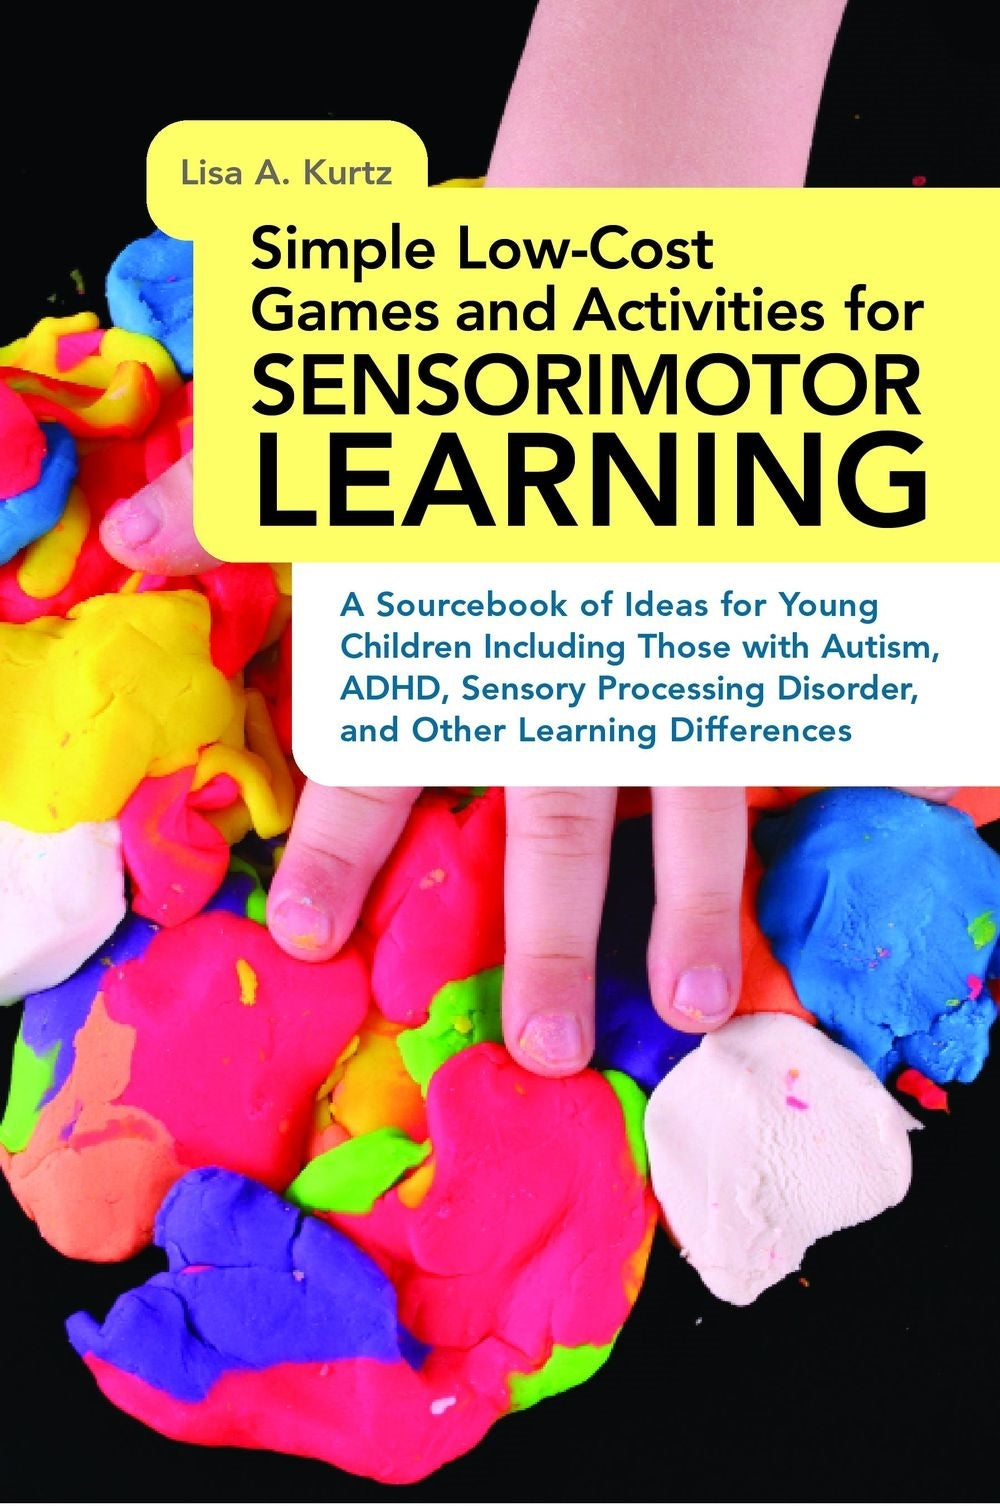 Simple Low-Cost Games and Activities for Sensorimotor Learning by Elizabeth A Kurtz